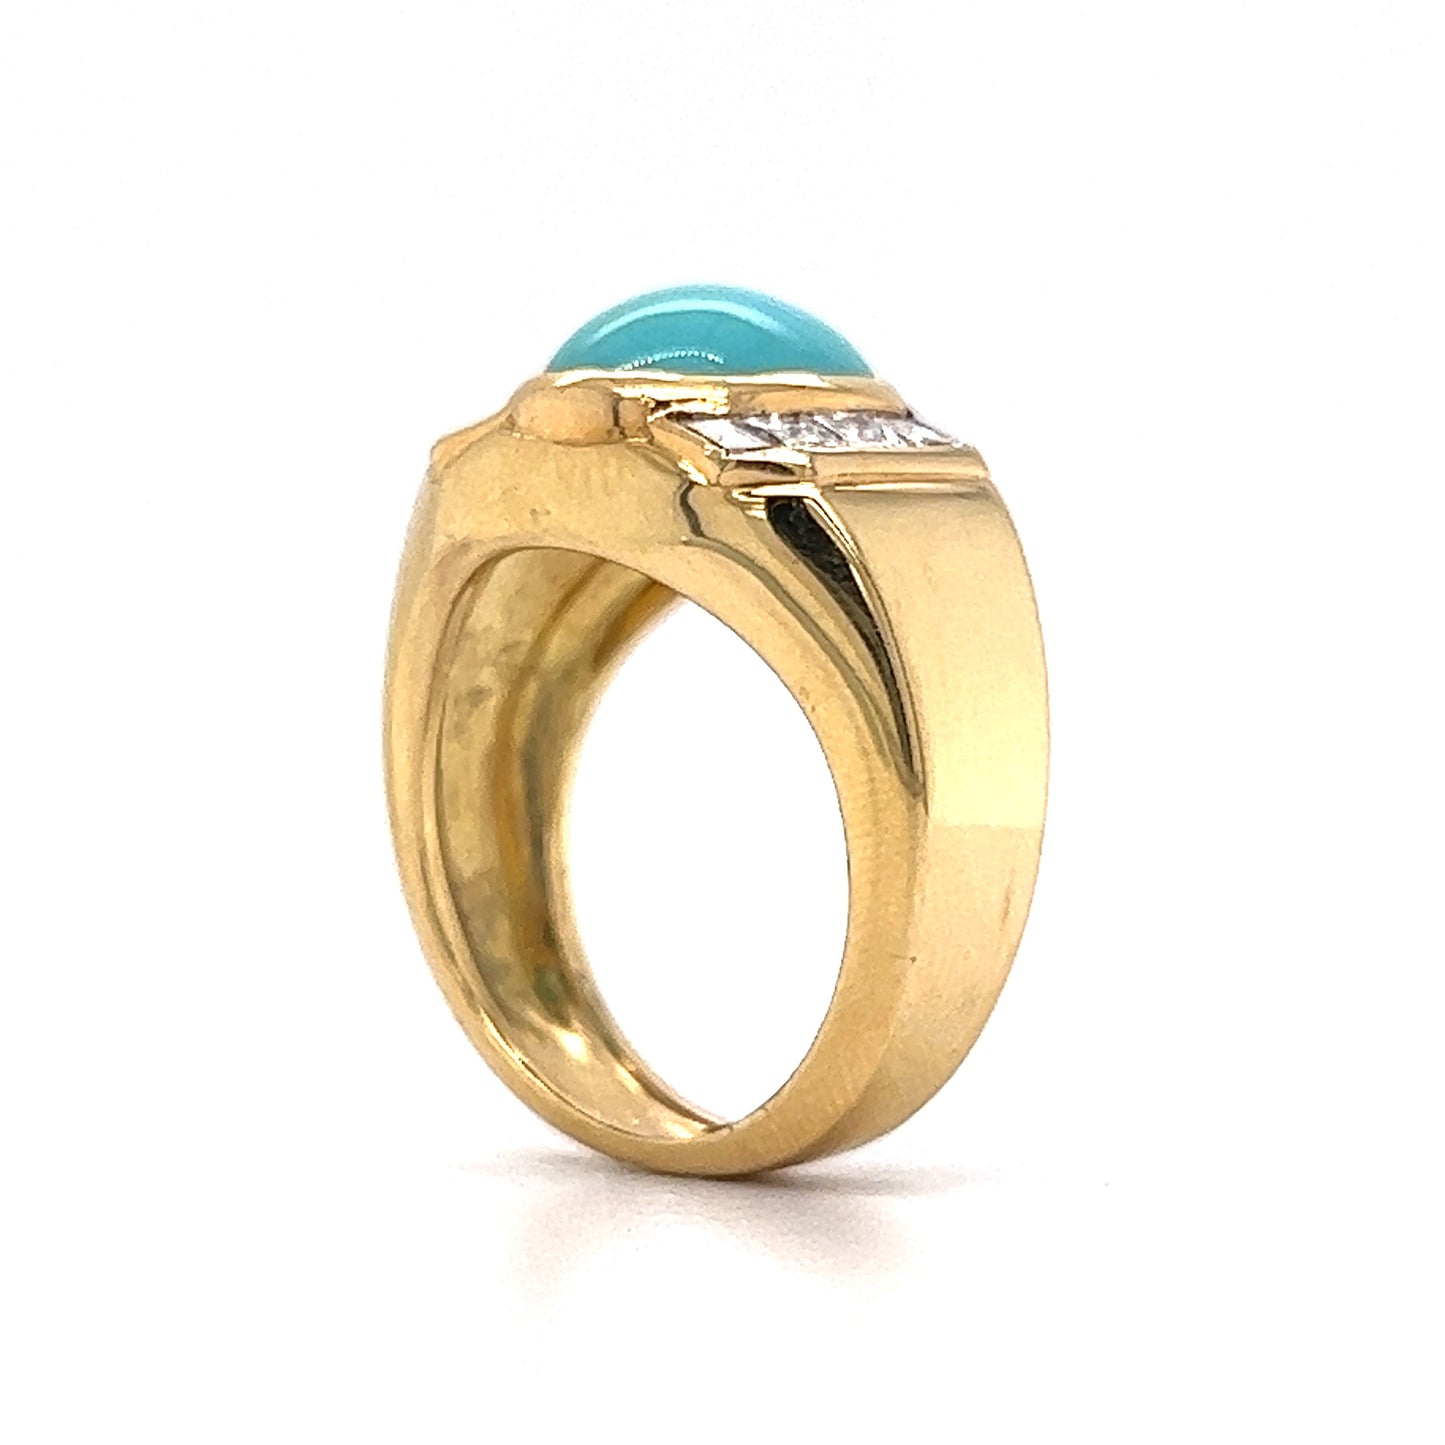 3.25 Cabochon Cut Turquoise Cocktail Ring in 18k Yellow Gold